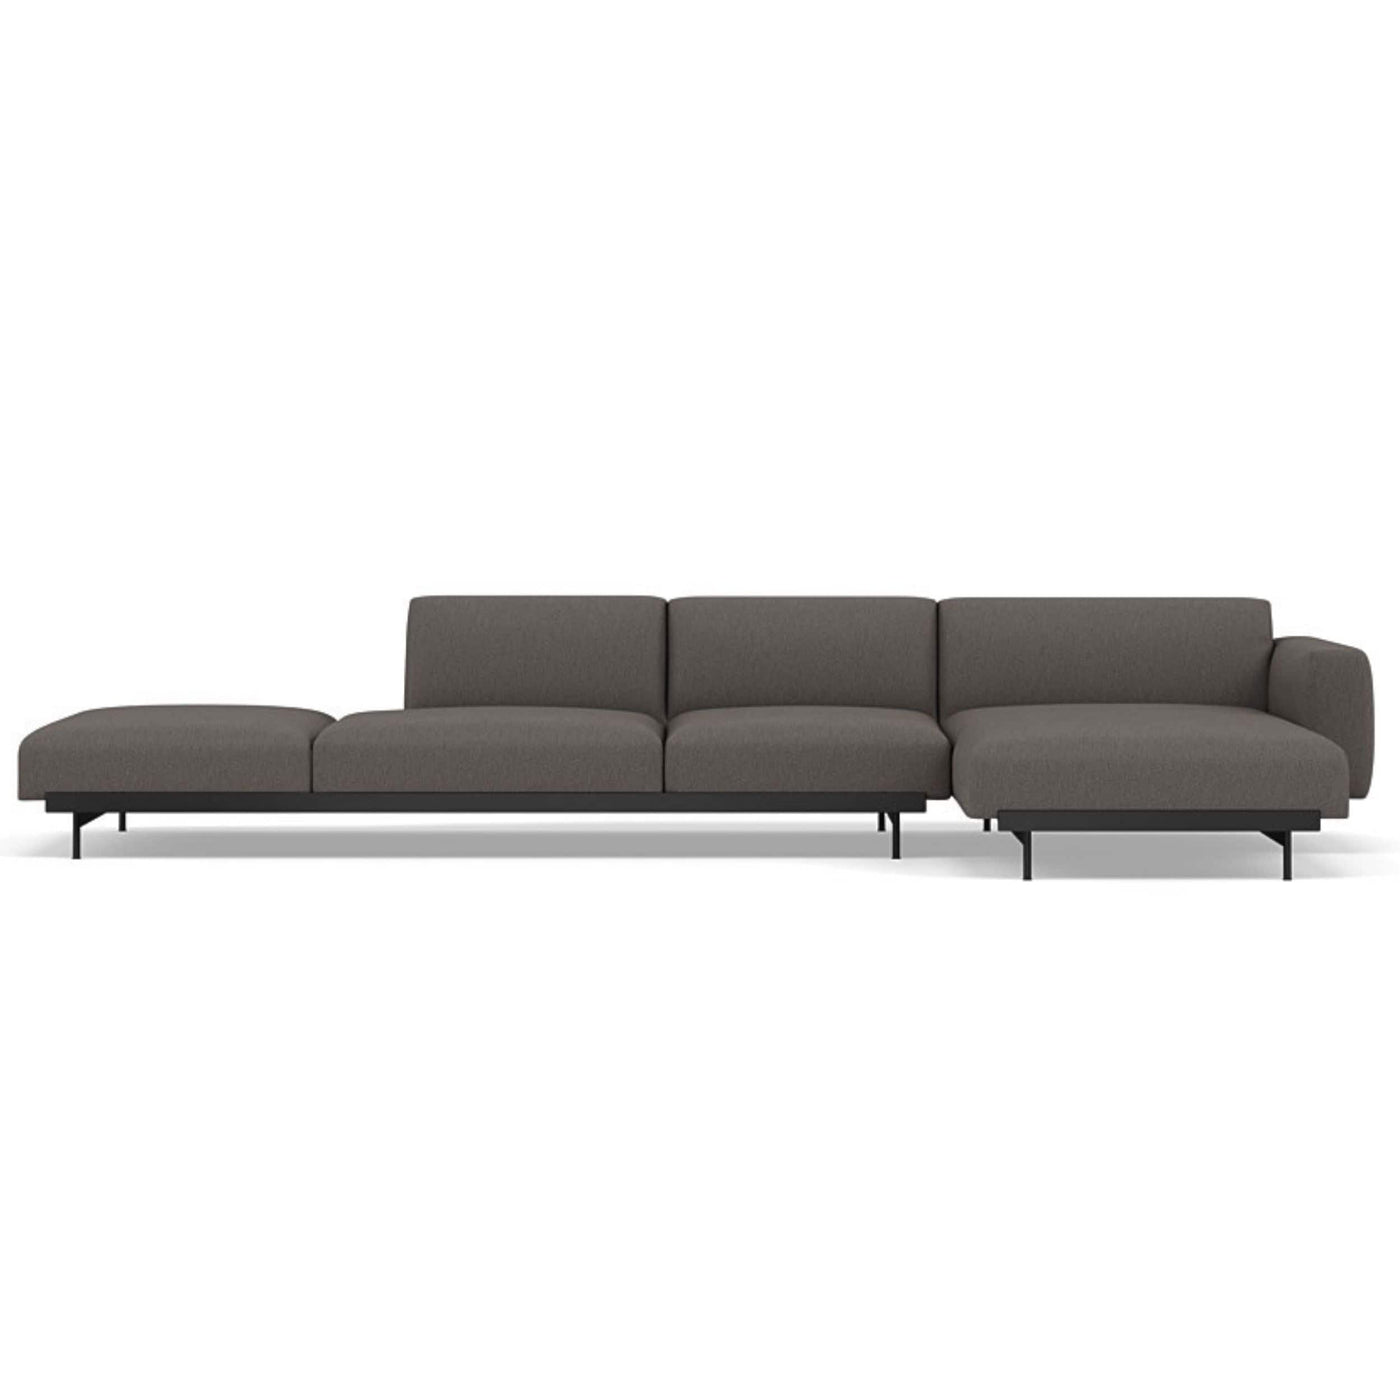 Muuto In Situ Modular 4 Seater Sofa configuration 4. Made to order from someday designs. #colour_clay-9